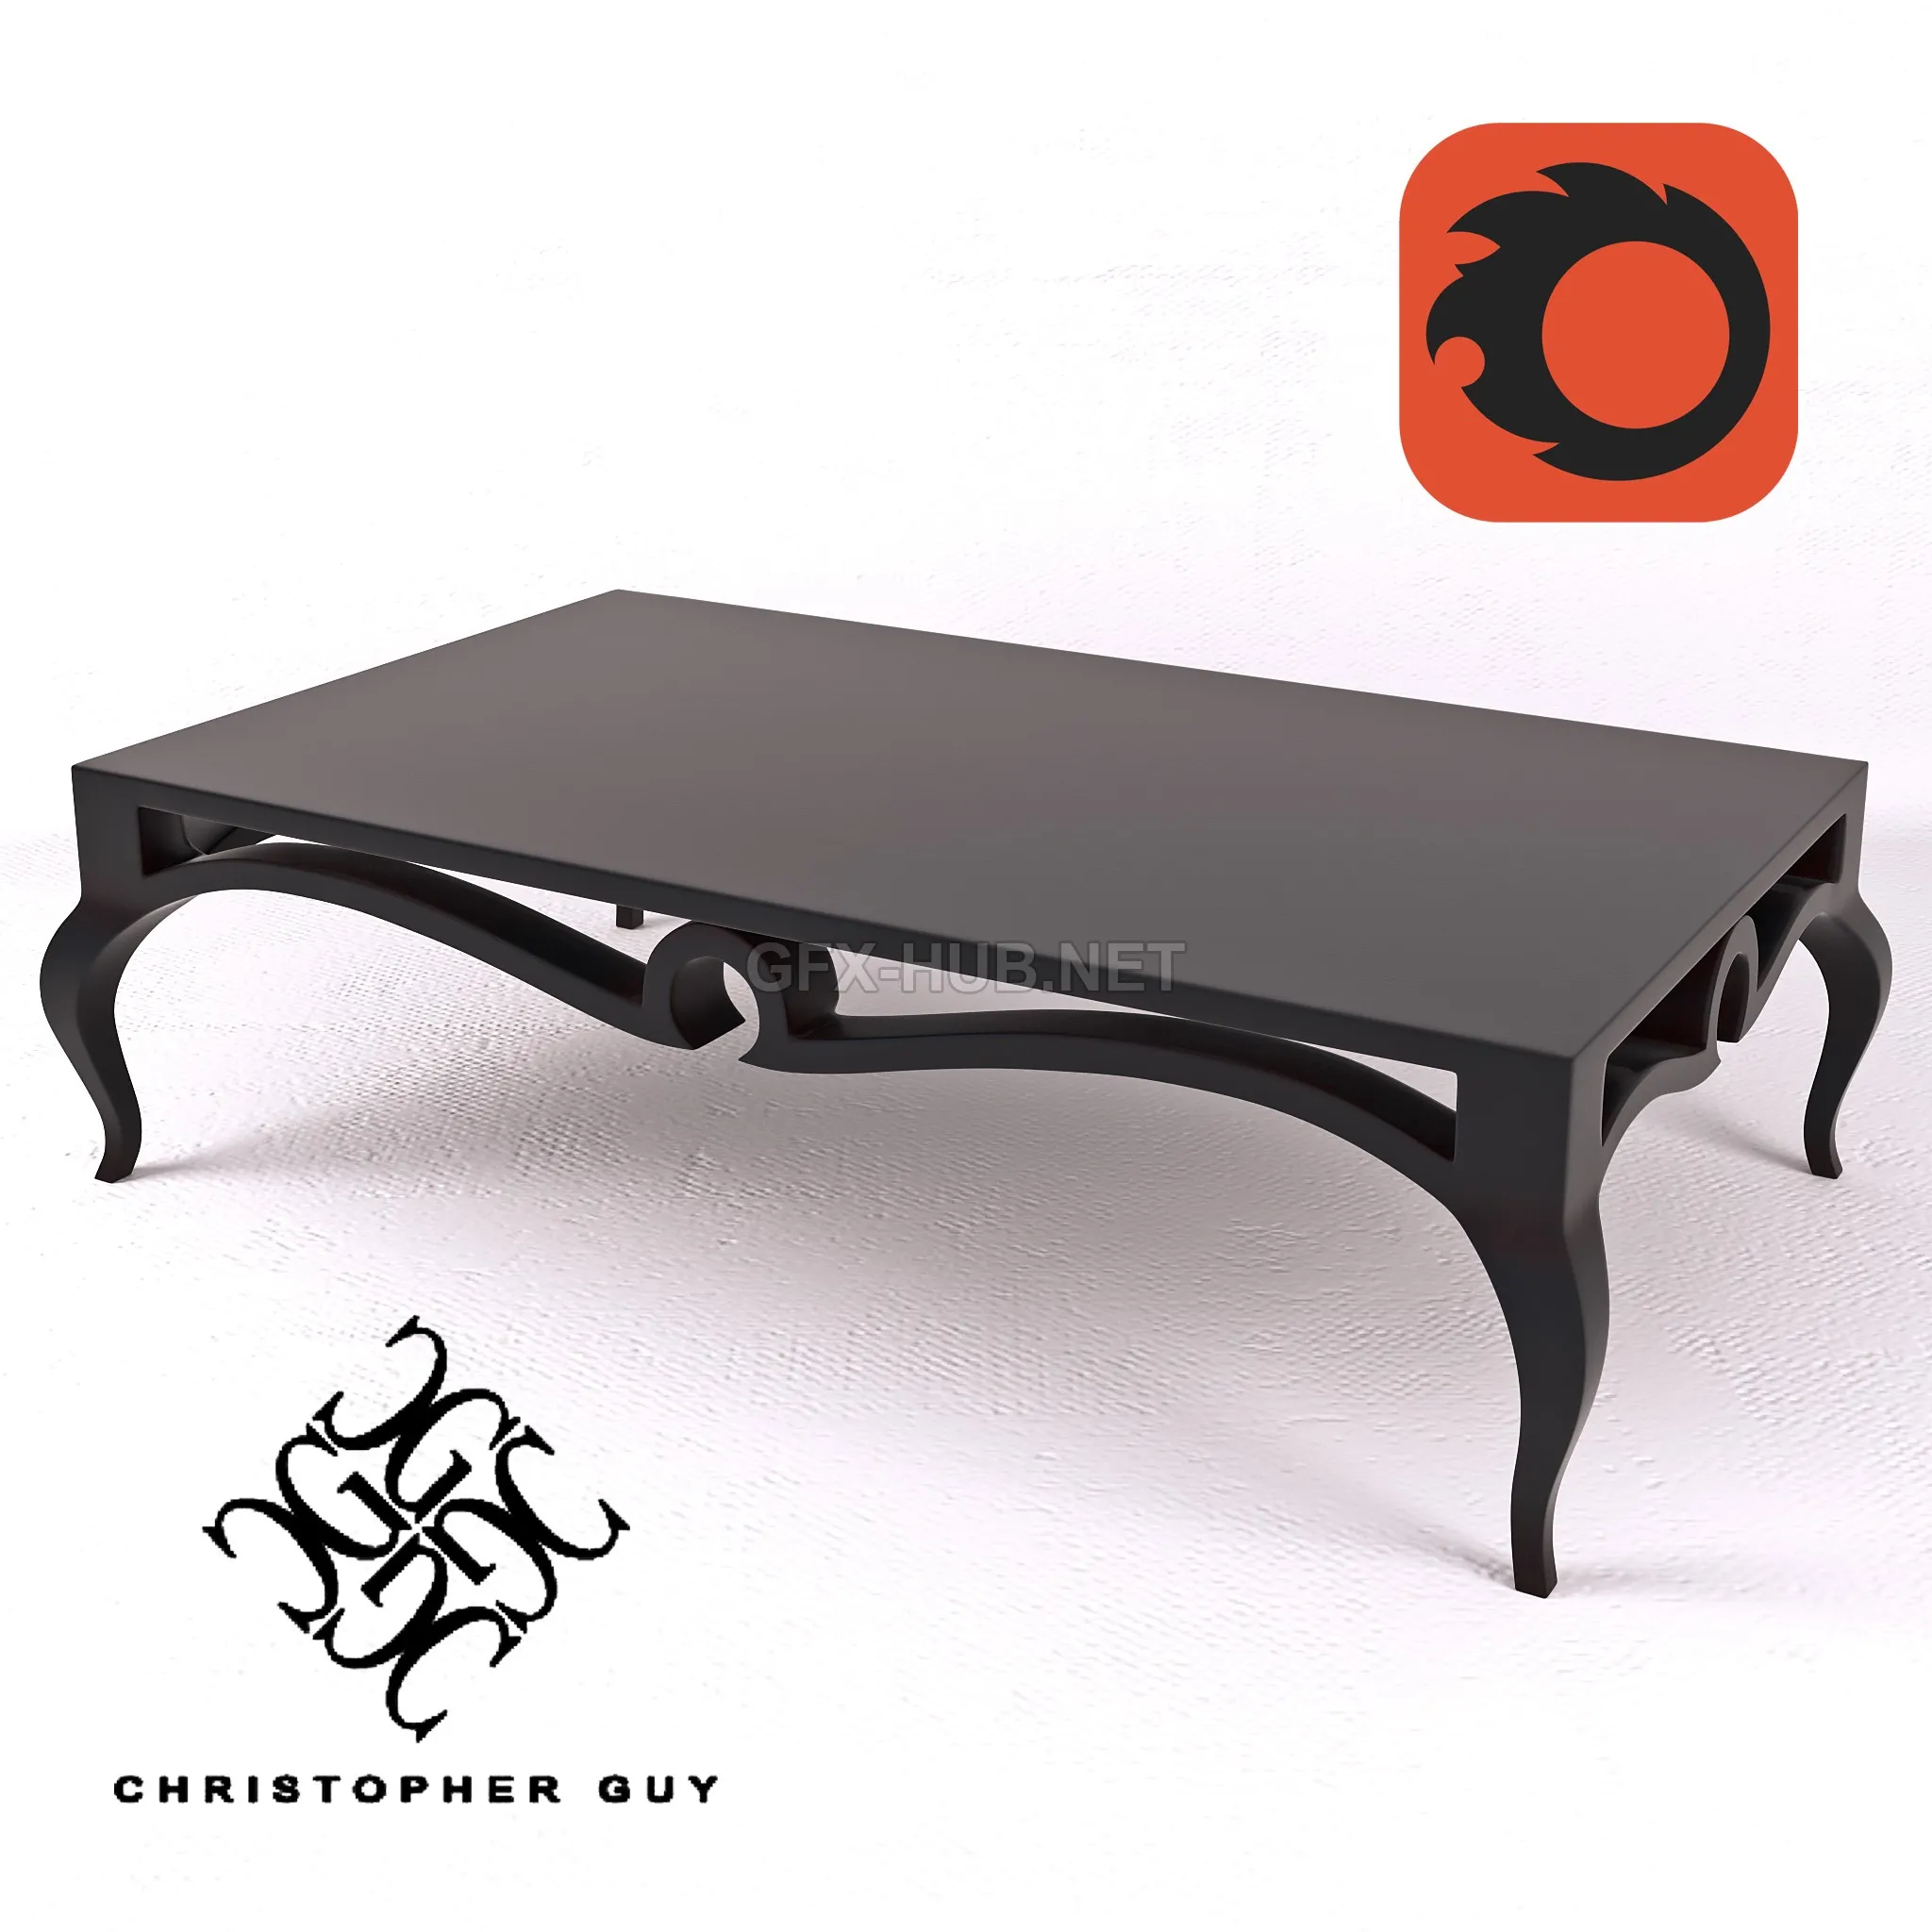 Piaget table by CG – 222371